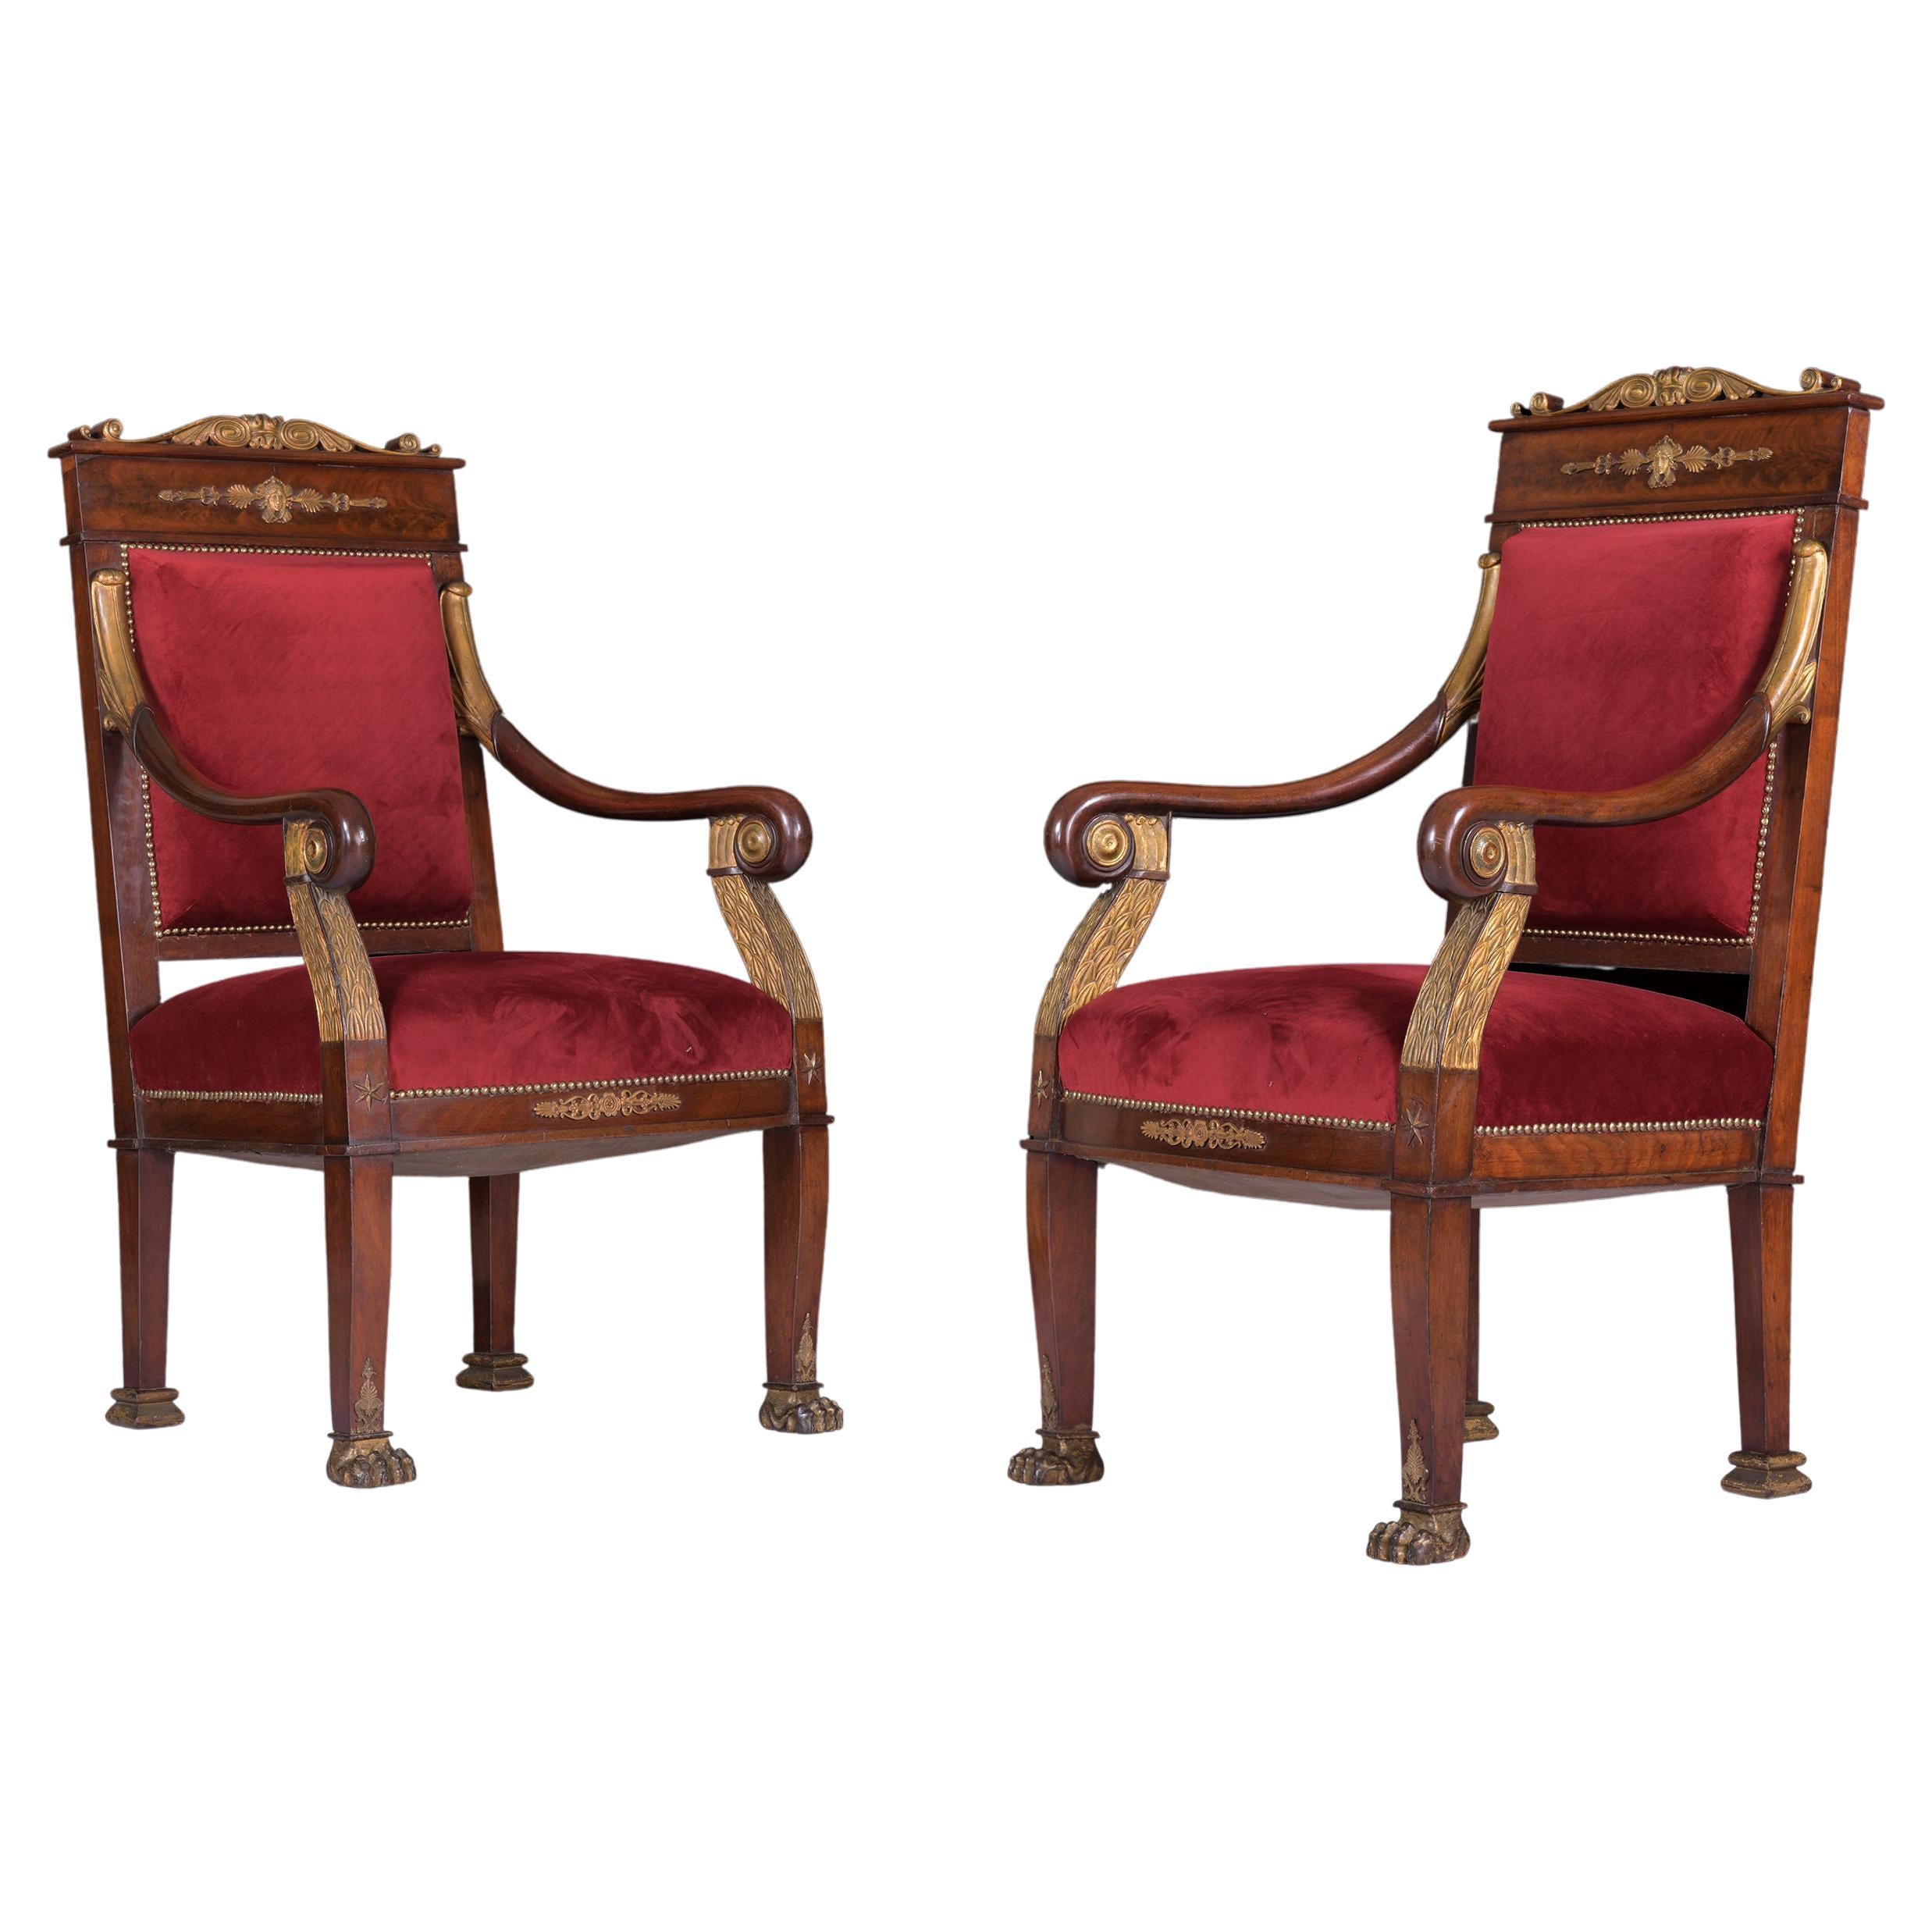 Pair Of Early 19th C French Empire Armchairs In The Manner Of Jacob-Desmalter